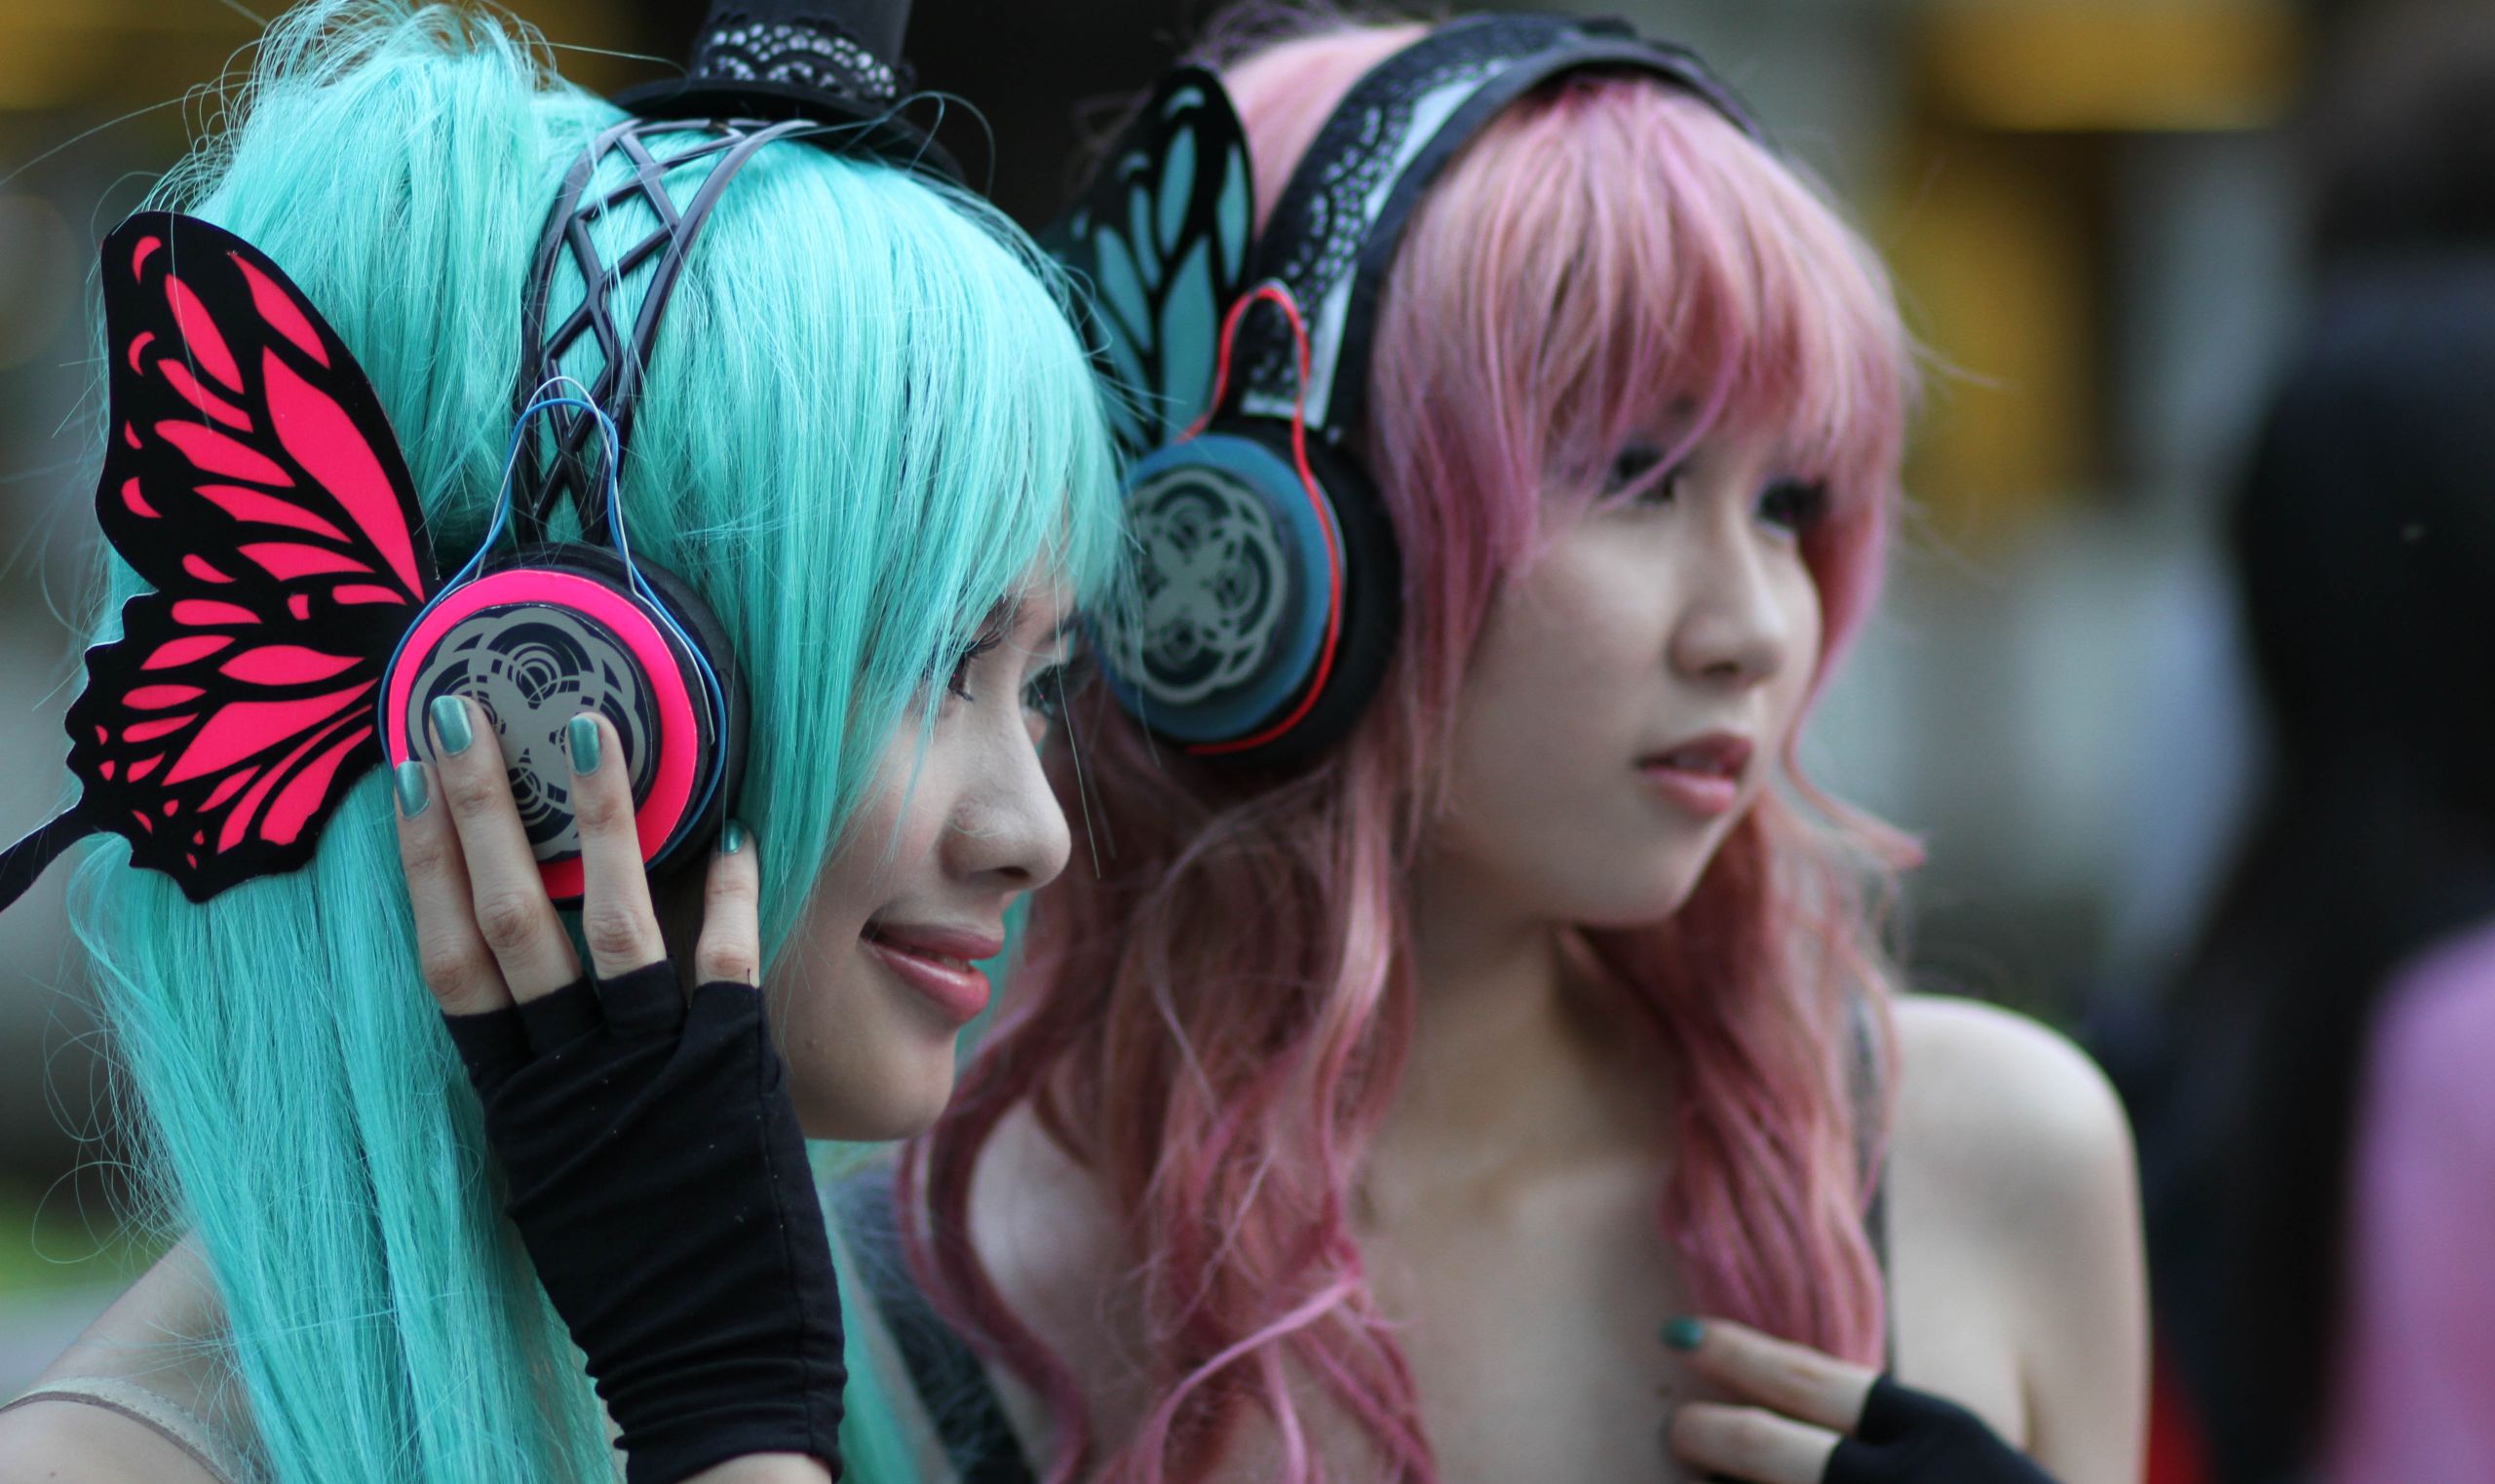 Women dressed in kawaii style including butterfly headphones. Image courtesy of Ryan Lackey under a CC licence via Flikr